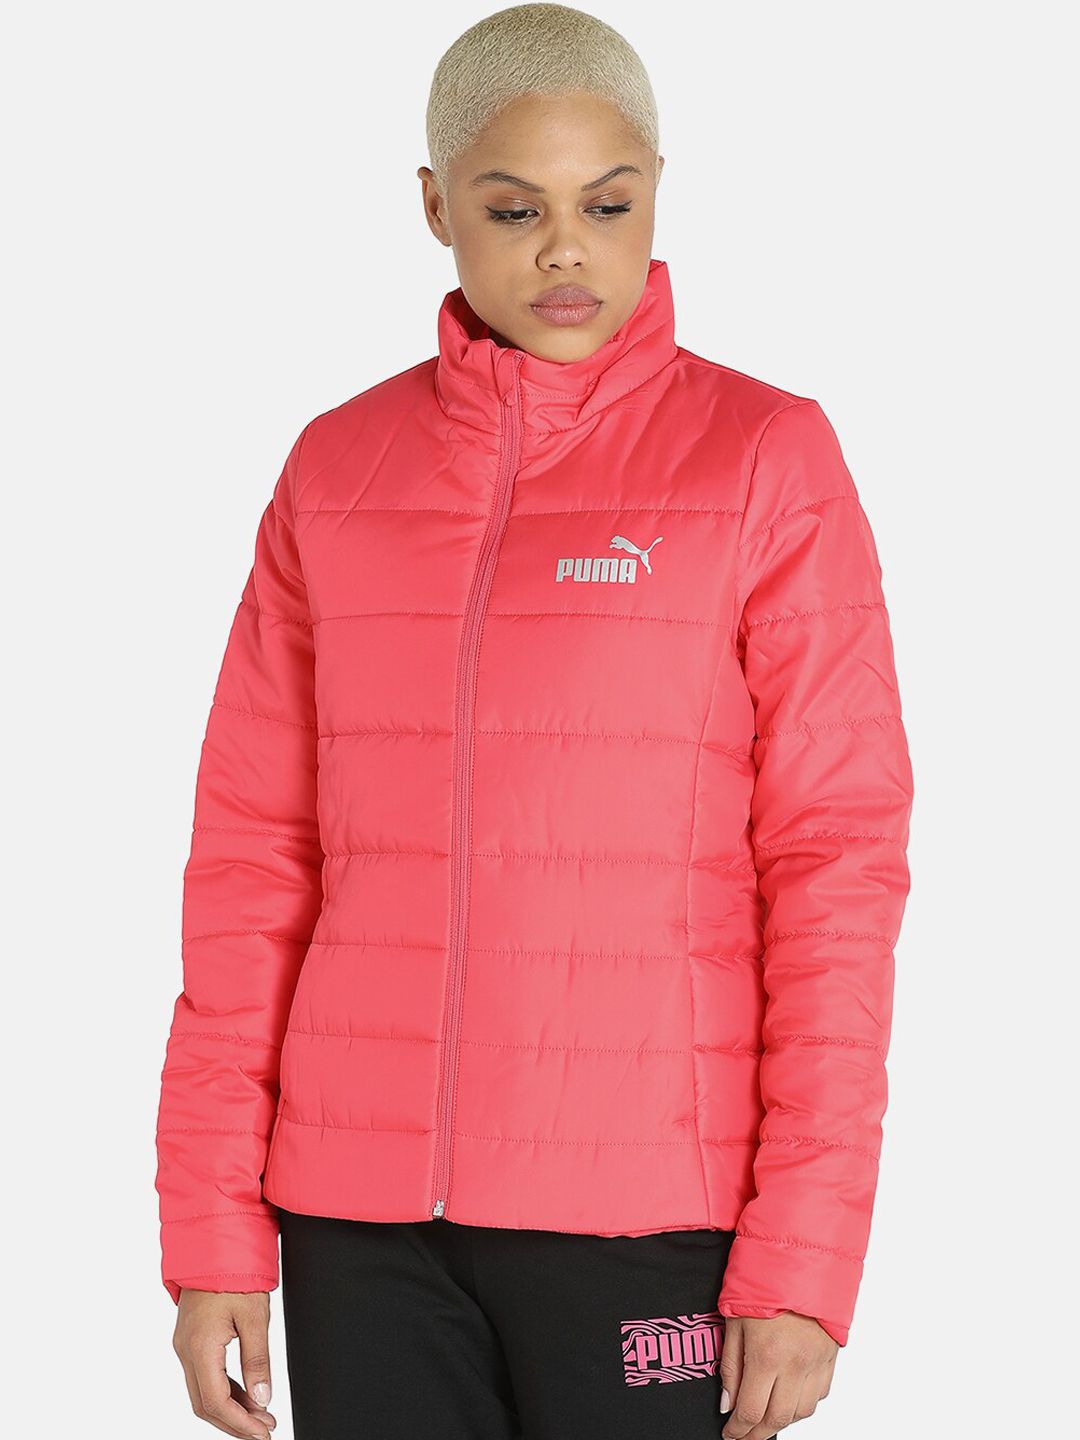 Puma Women Pink Slim Fit RCB Padded Jacket Price in India